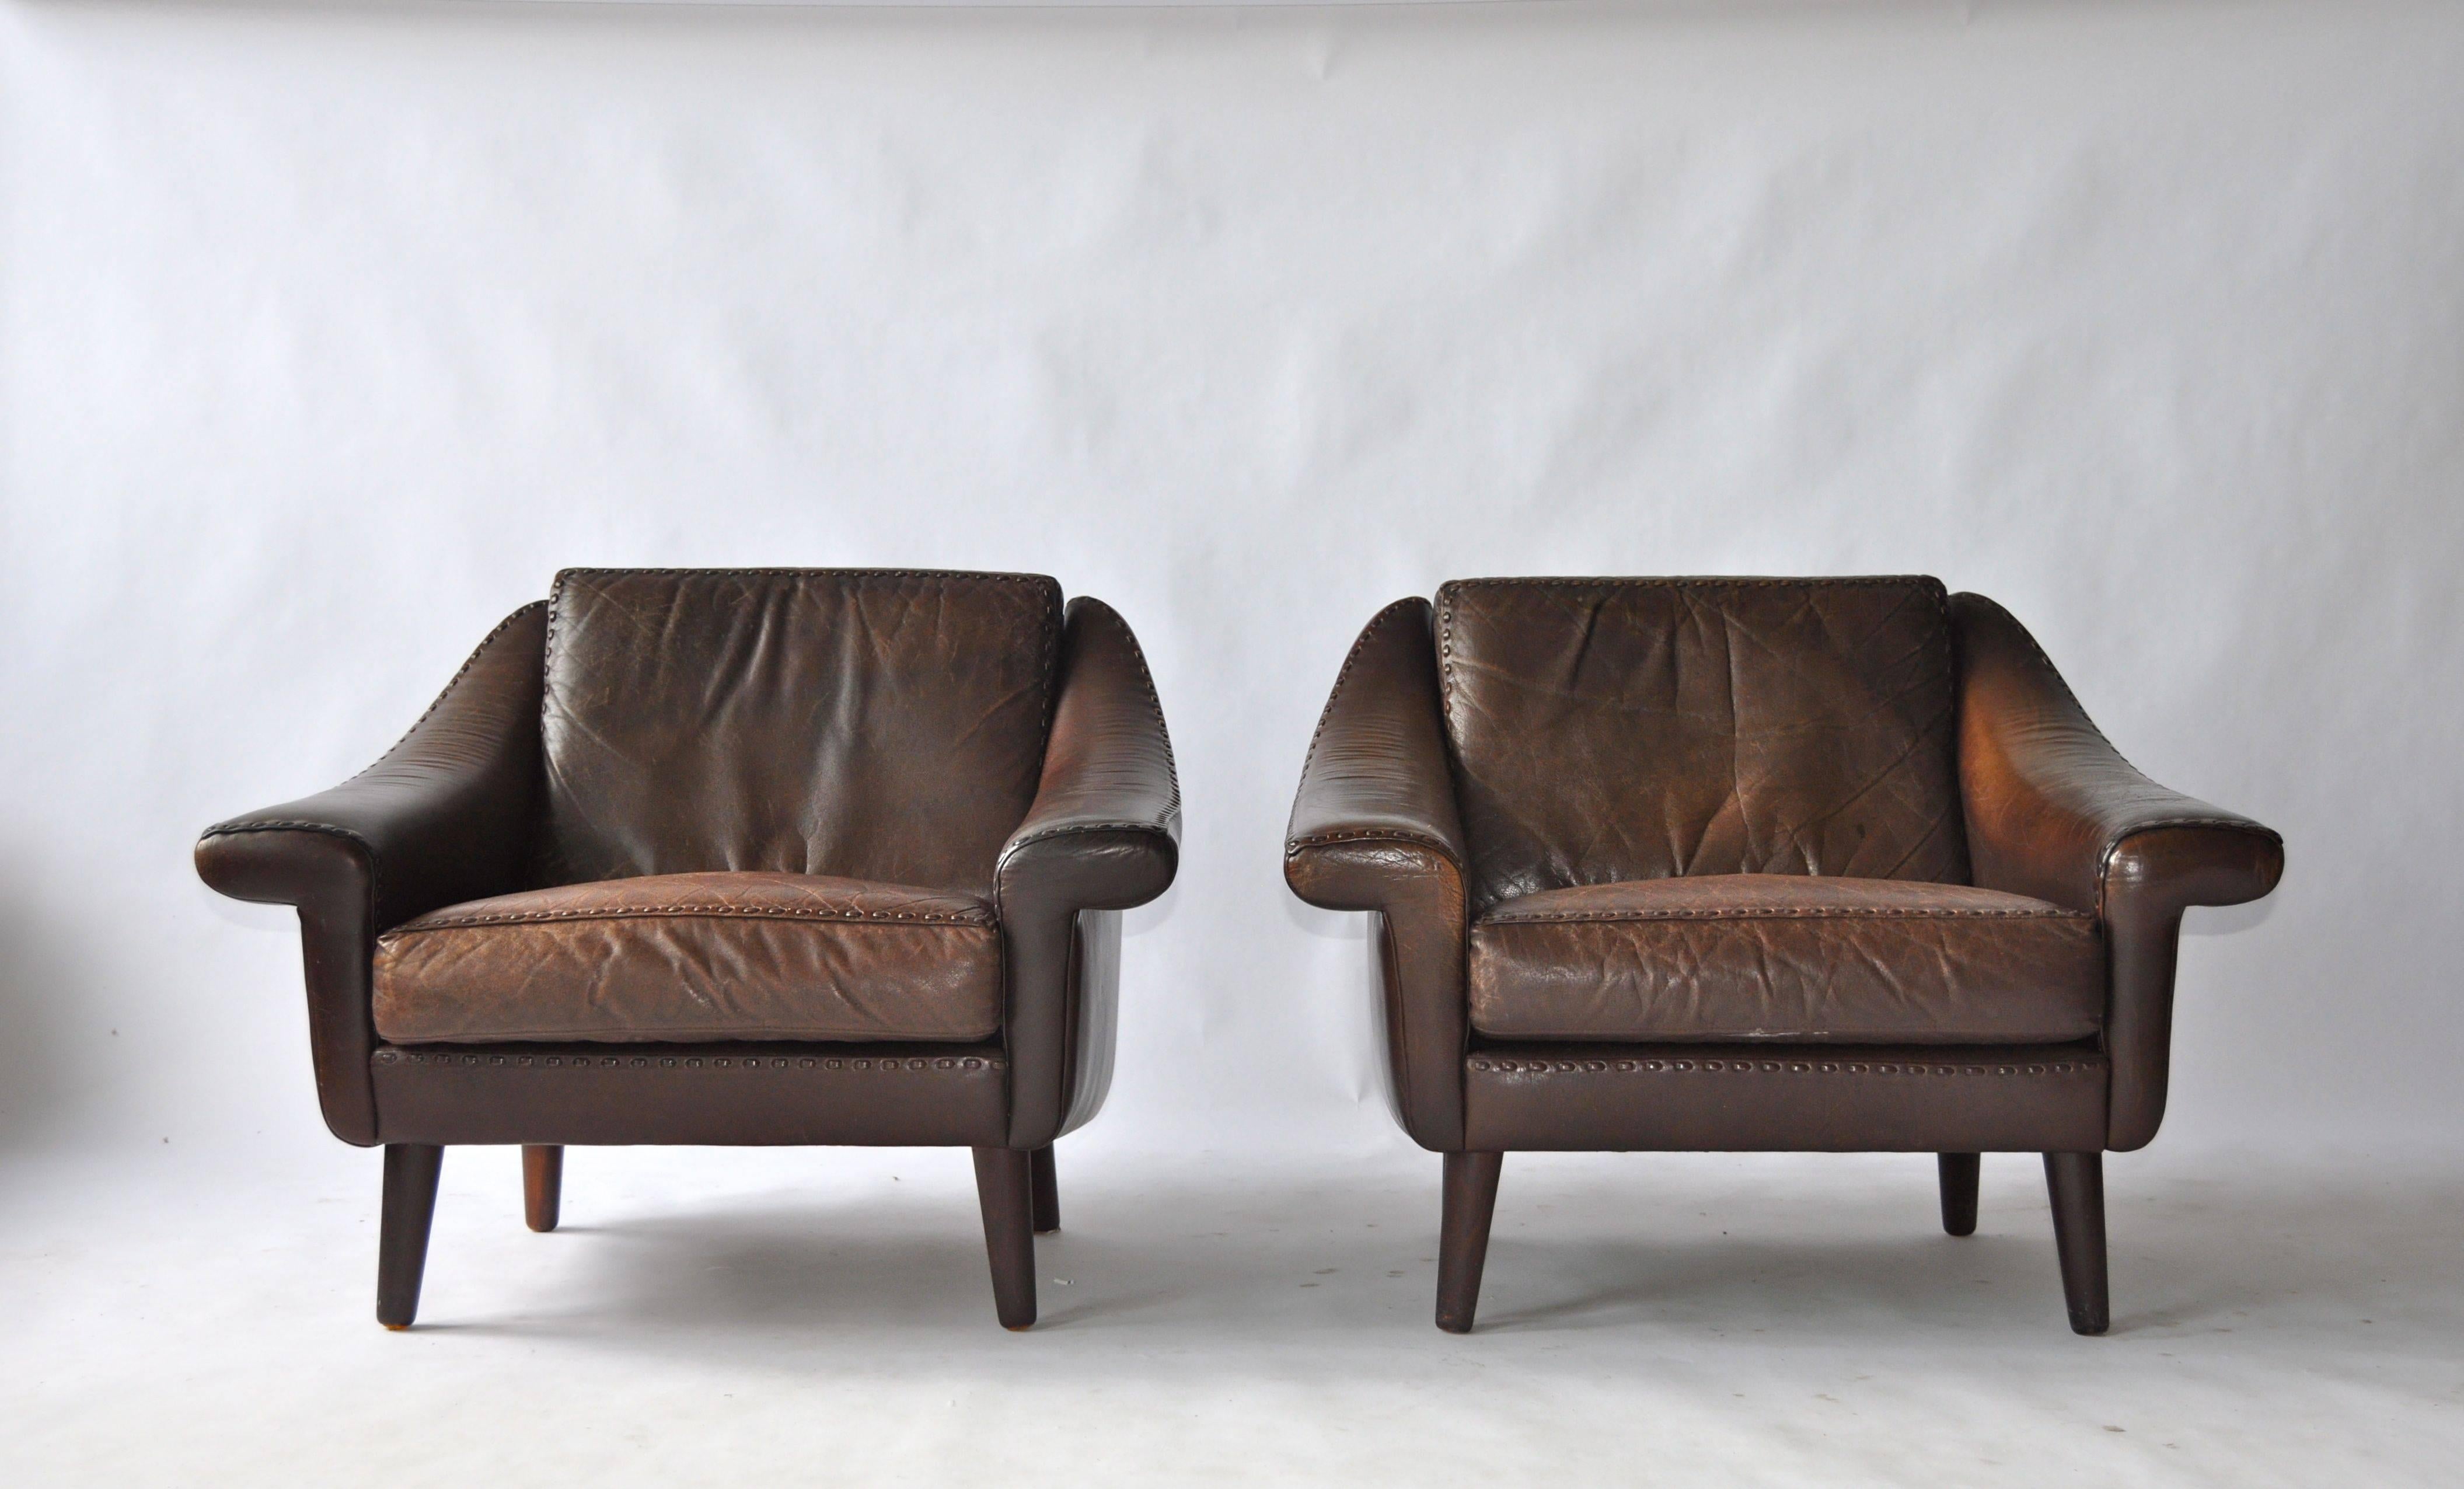 Pair of Aage Christiansen Danish leather lounge chairs. Original leather with great patina. Stained teak legs.